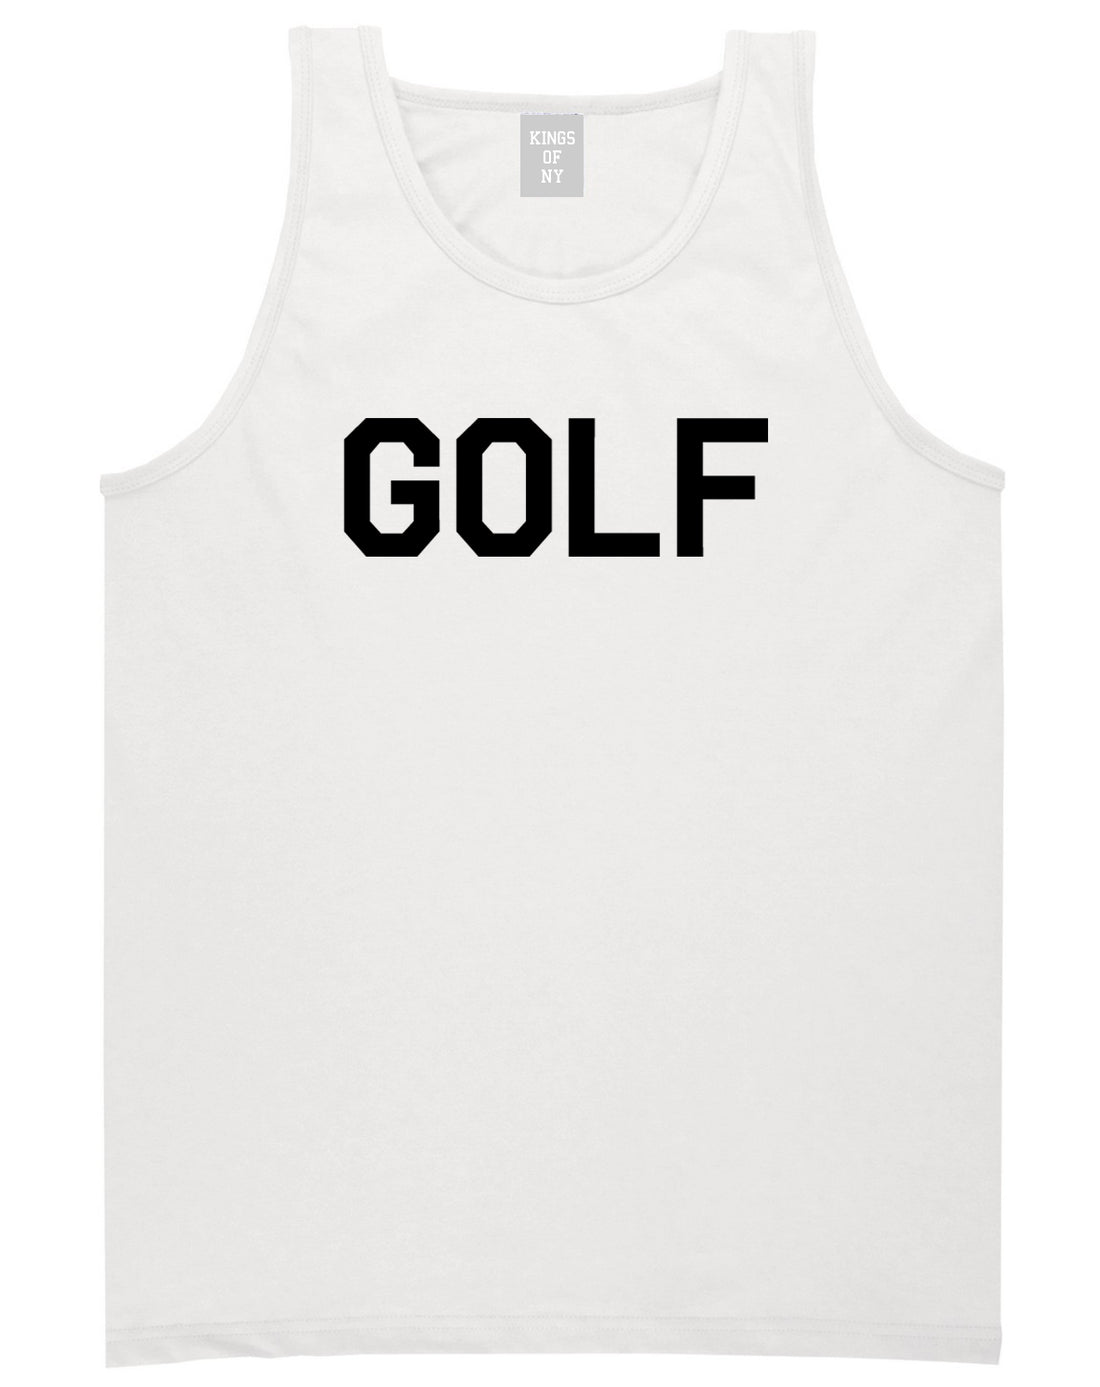 Golf Sport Mens White Tank Top Shirt by KINGS OF NY